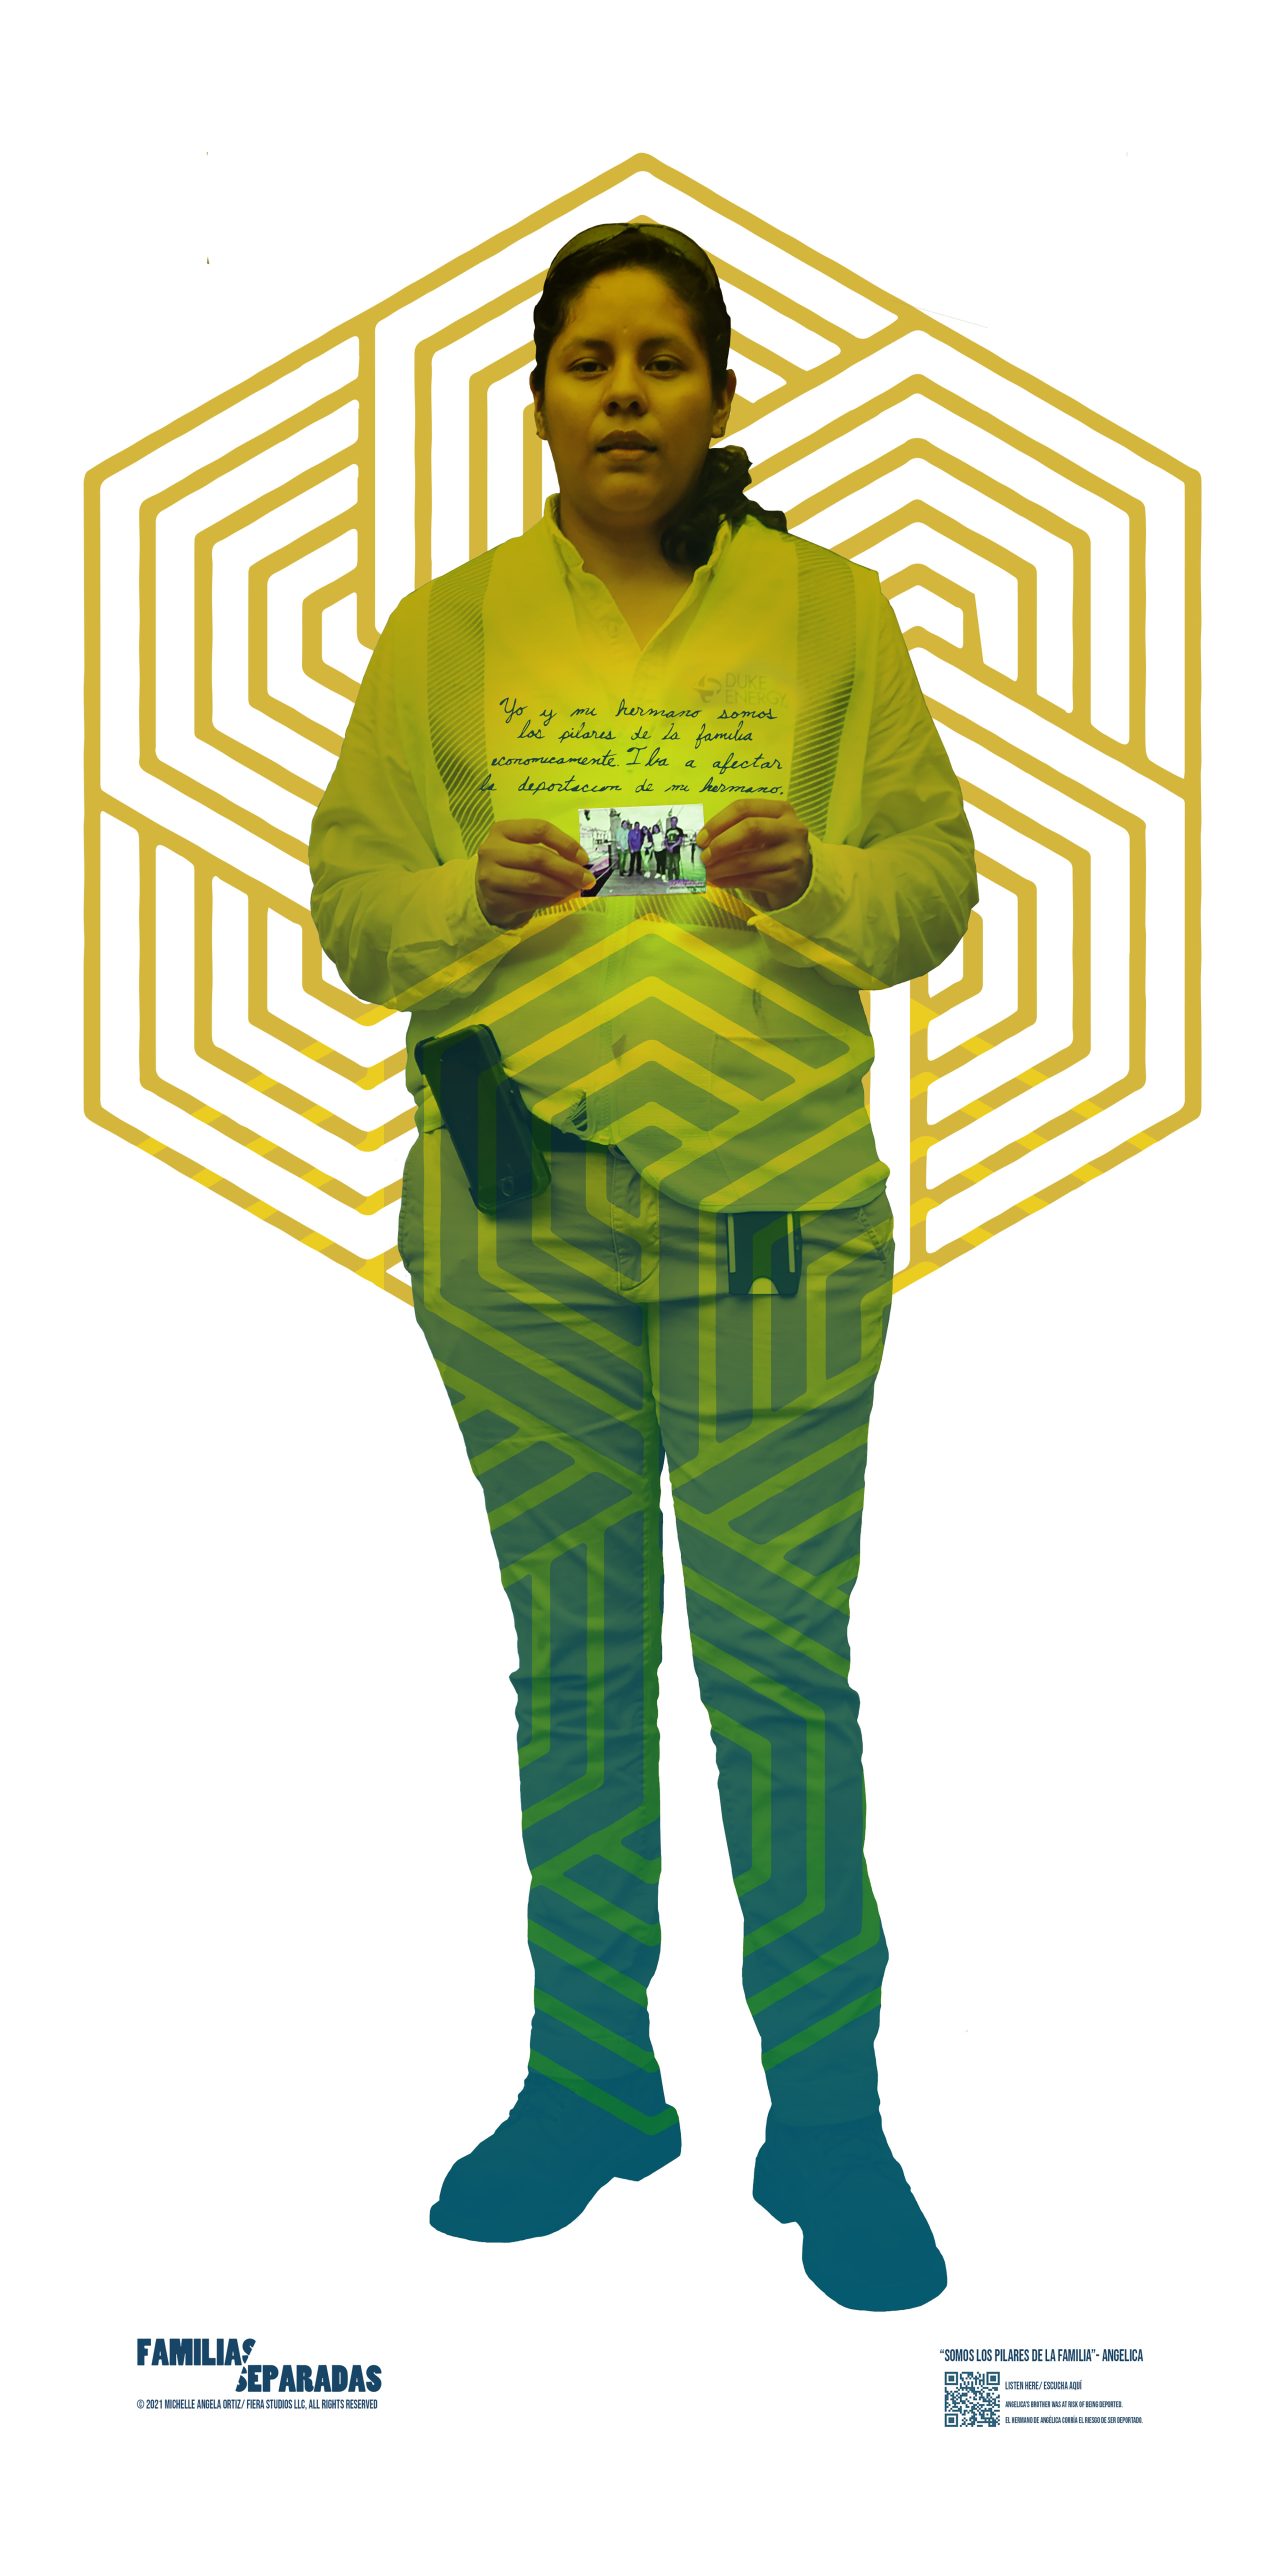 Poster: A poster of a portrait of Angelica Davila standing holding a photograph of her family, with words about her brother written in script above the photograph in Spanish, a yellow hexagonal design around her and patterning her clothing. The logo for Familias Separadas appears in a lower corner. Video: Opening with the words Familias Separadas, in text that separates in two directions, a video shows Angelica Davila, a Latina woman with black hair wearing a black blouse with pink flowers on it, against a gray wall, as she gives an oral account or her brother's experience of being threatened by deportation and its impact on them. With subtitles translating Spanish to English.